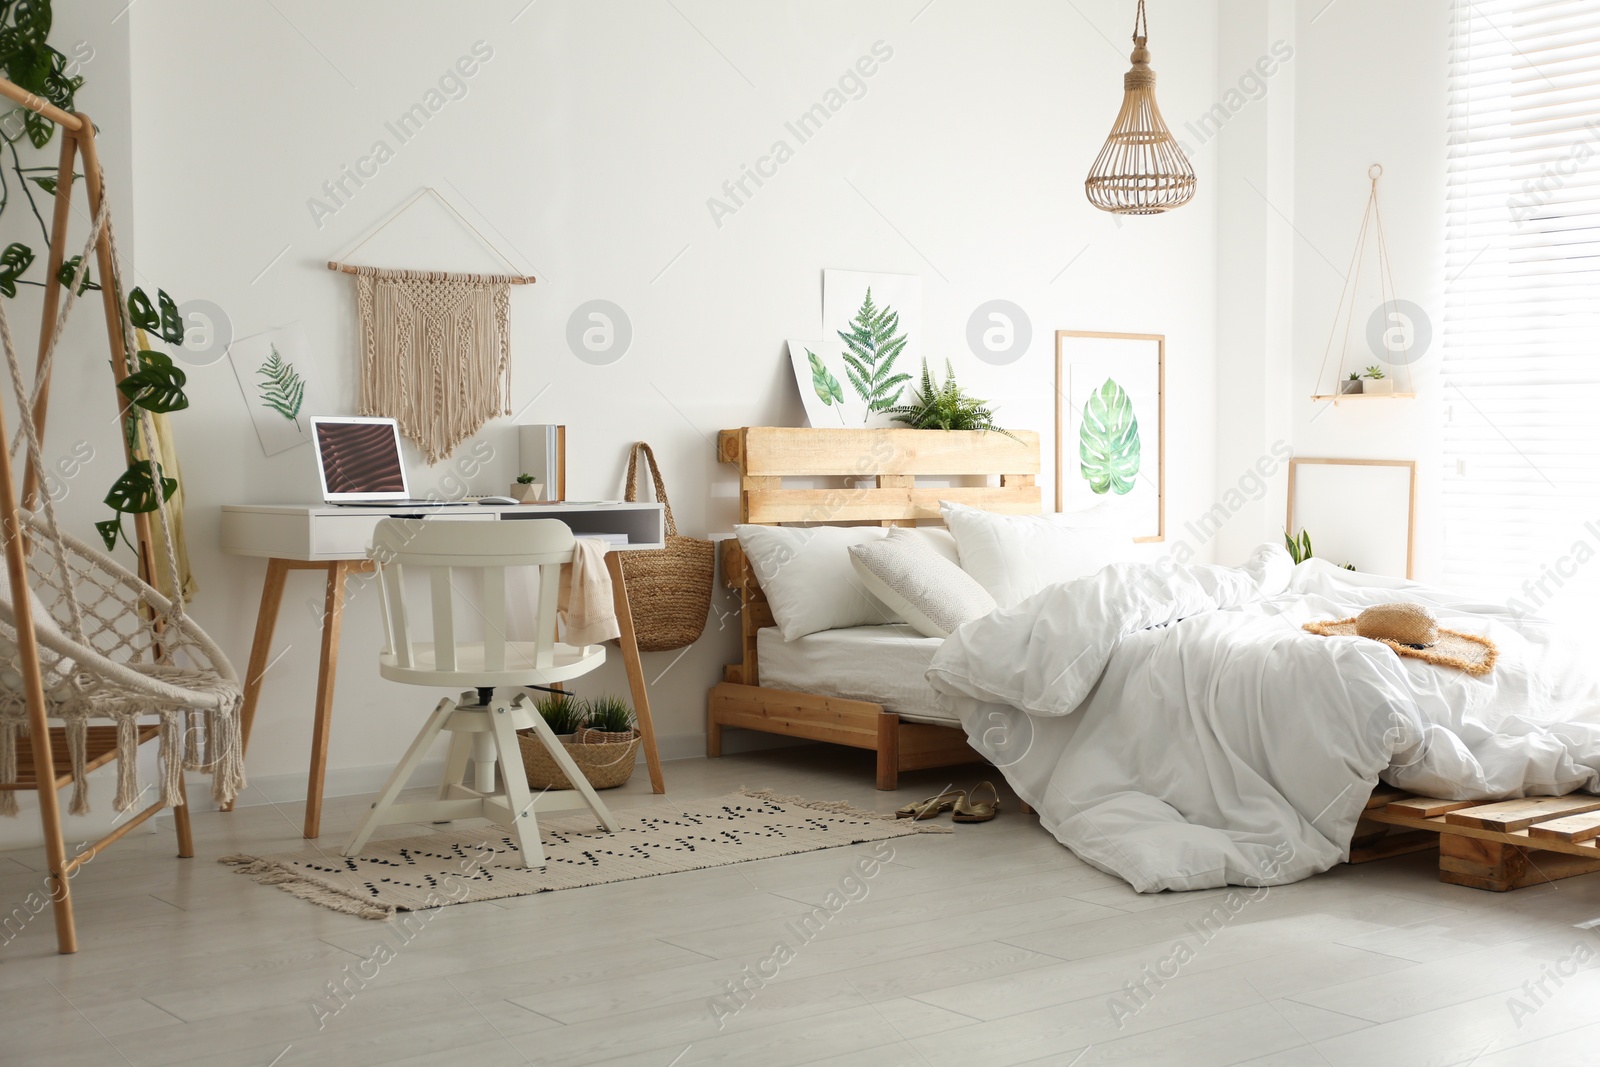 Photo of Stylish room interior with workplace, hanging chair and bed